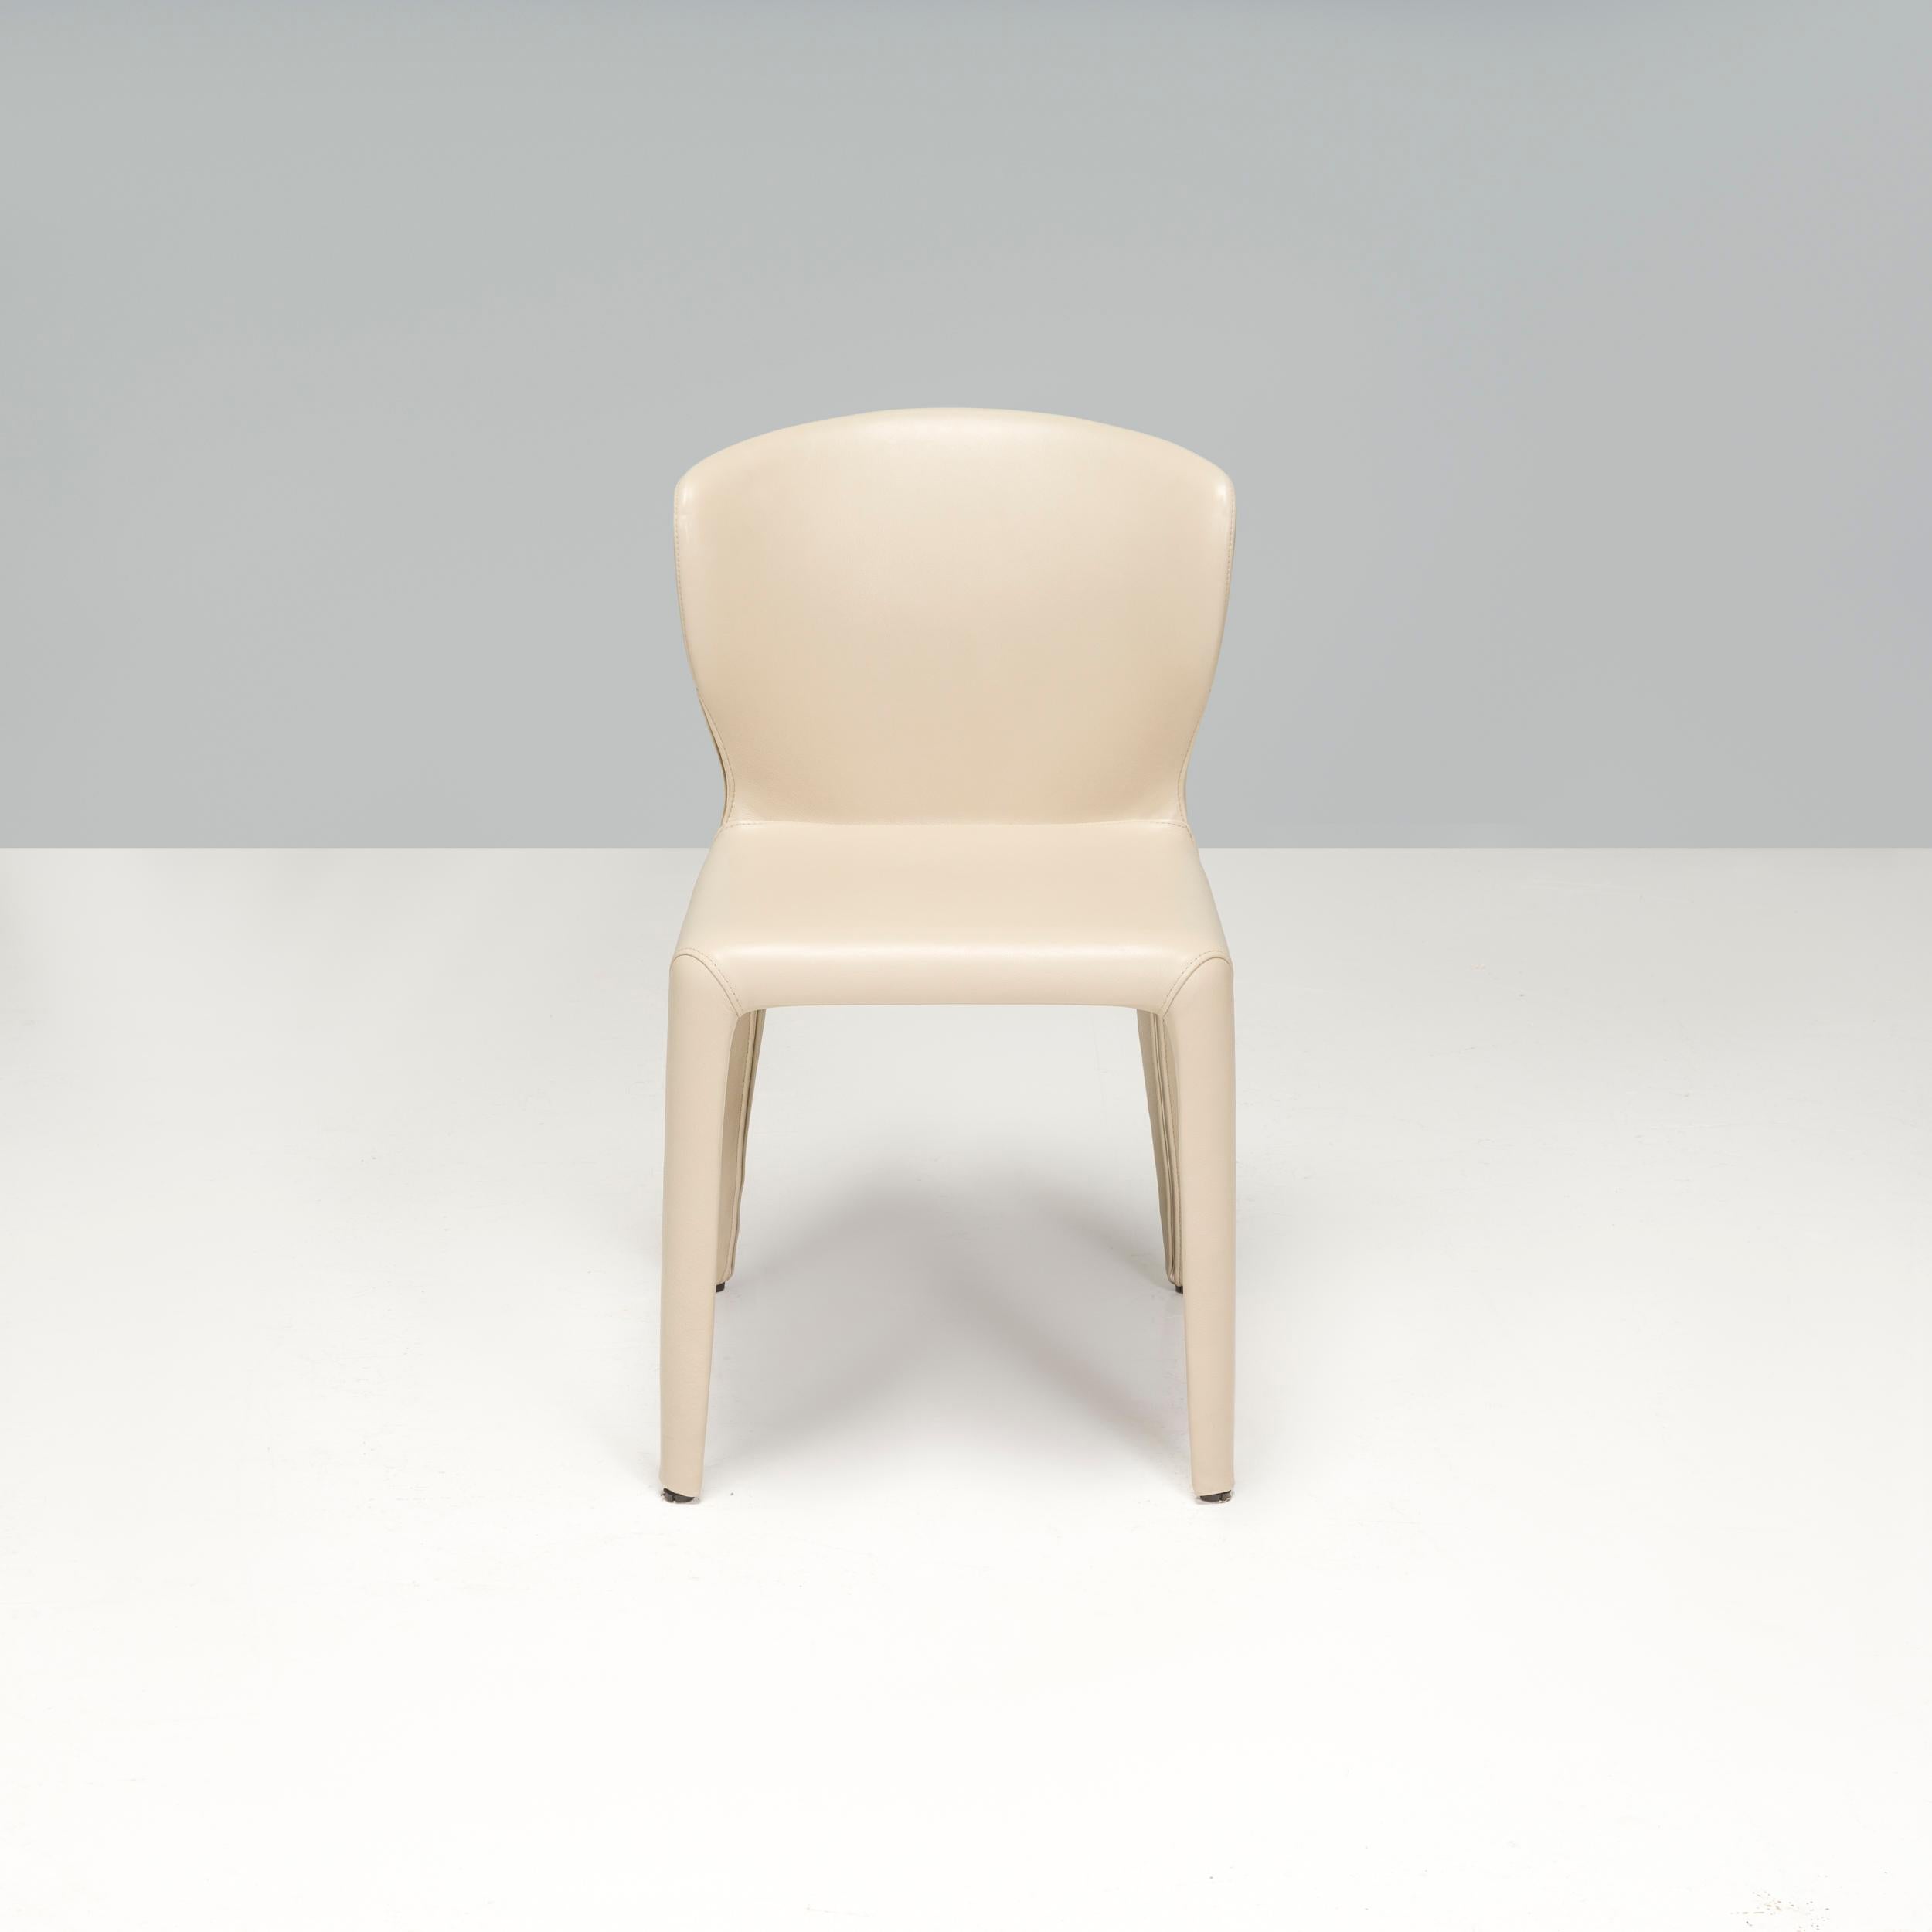 Cassina by Hannes Wettstein 367 Hola Cream Leather Dining Chairs, Set of 4 In Good Condition For Sale In London, GB